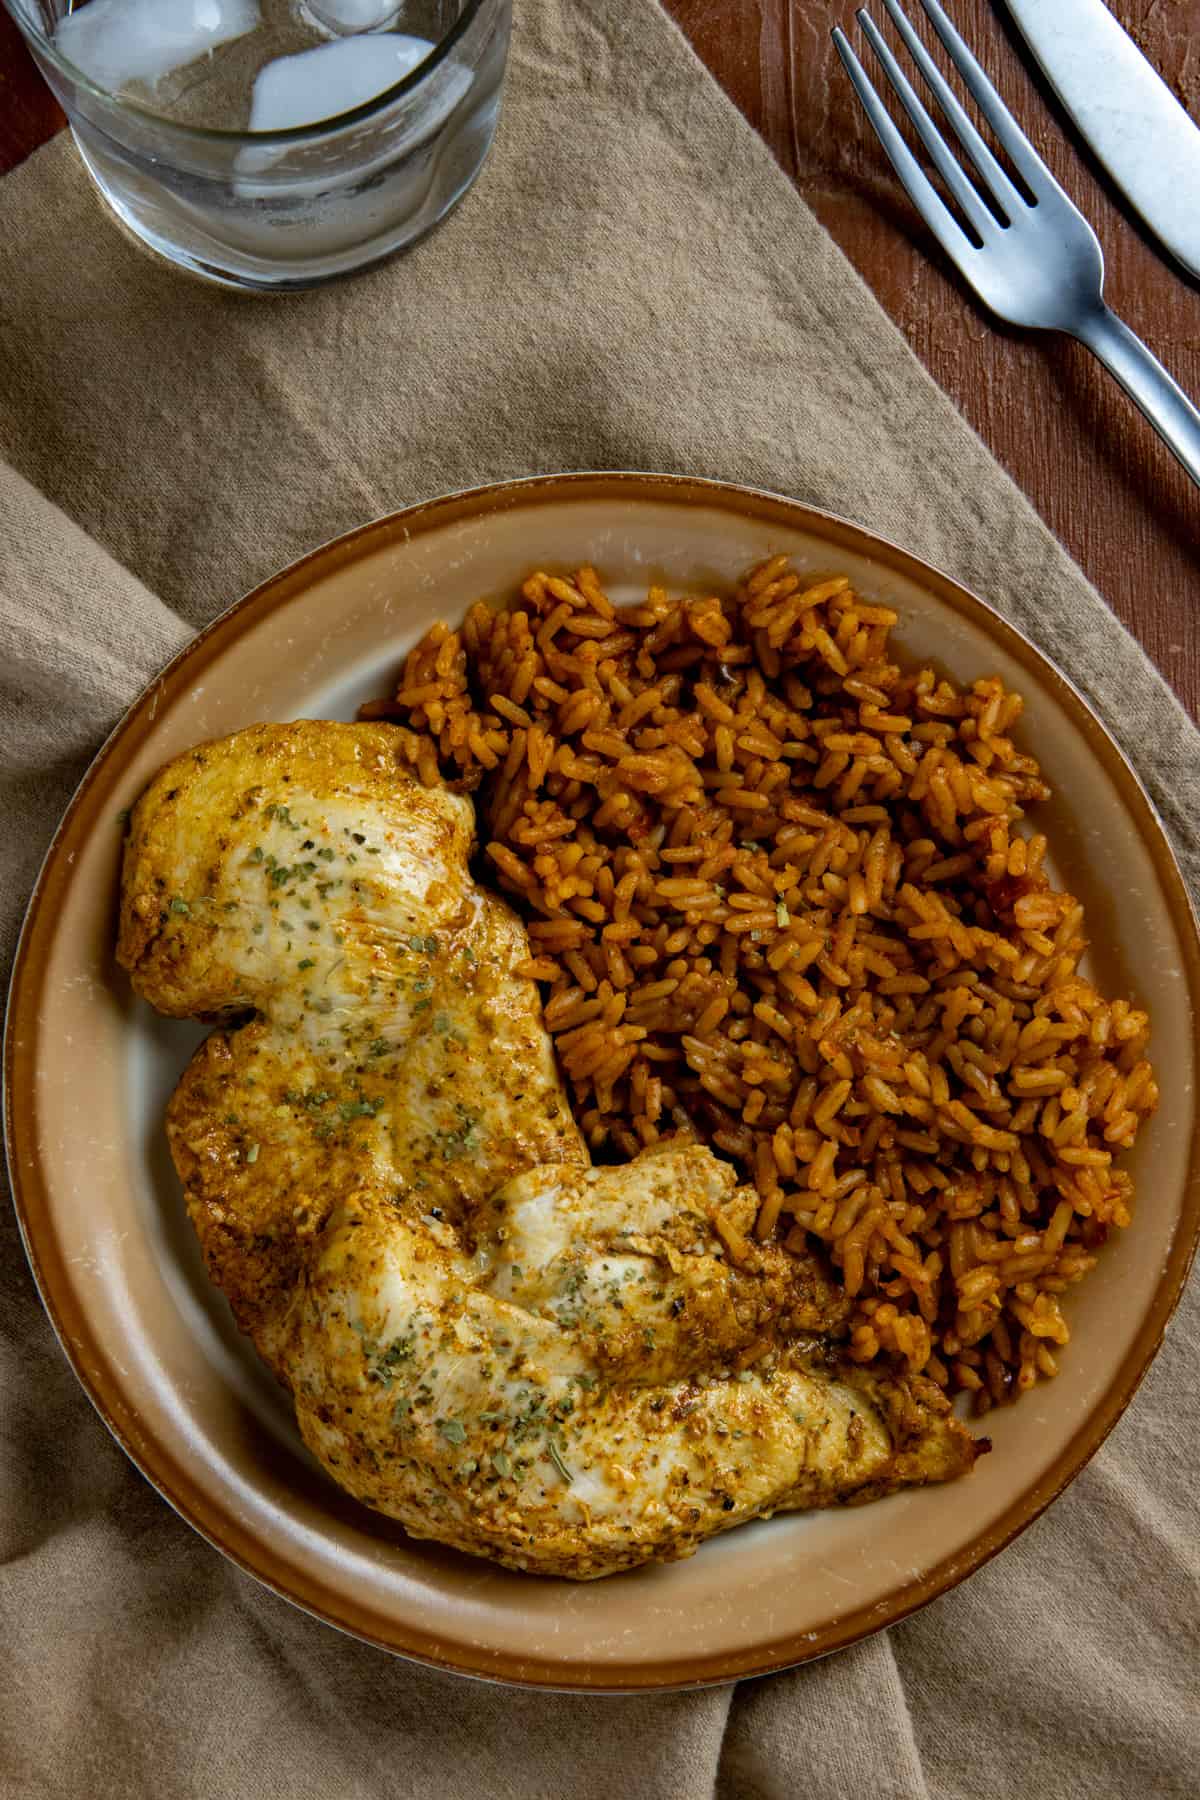 Baked chicken breast on brown plate with a side of Mexican rice.